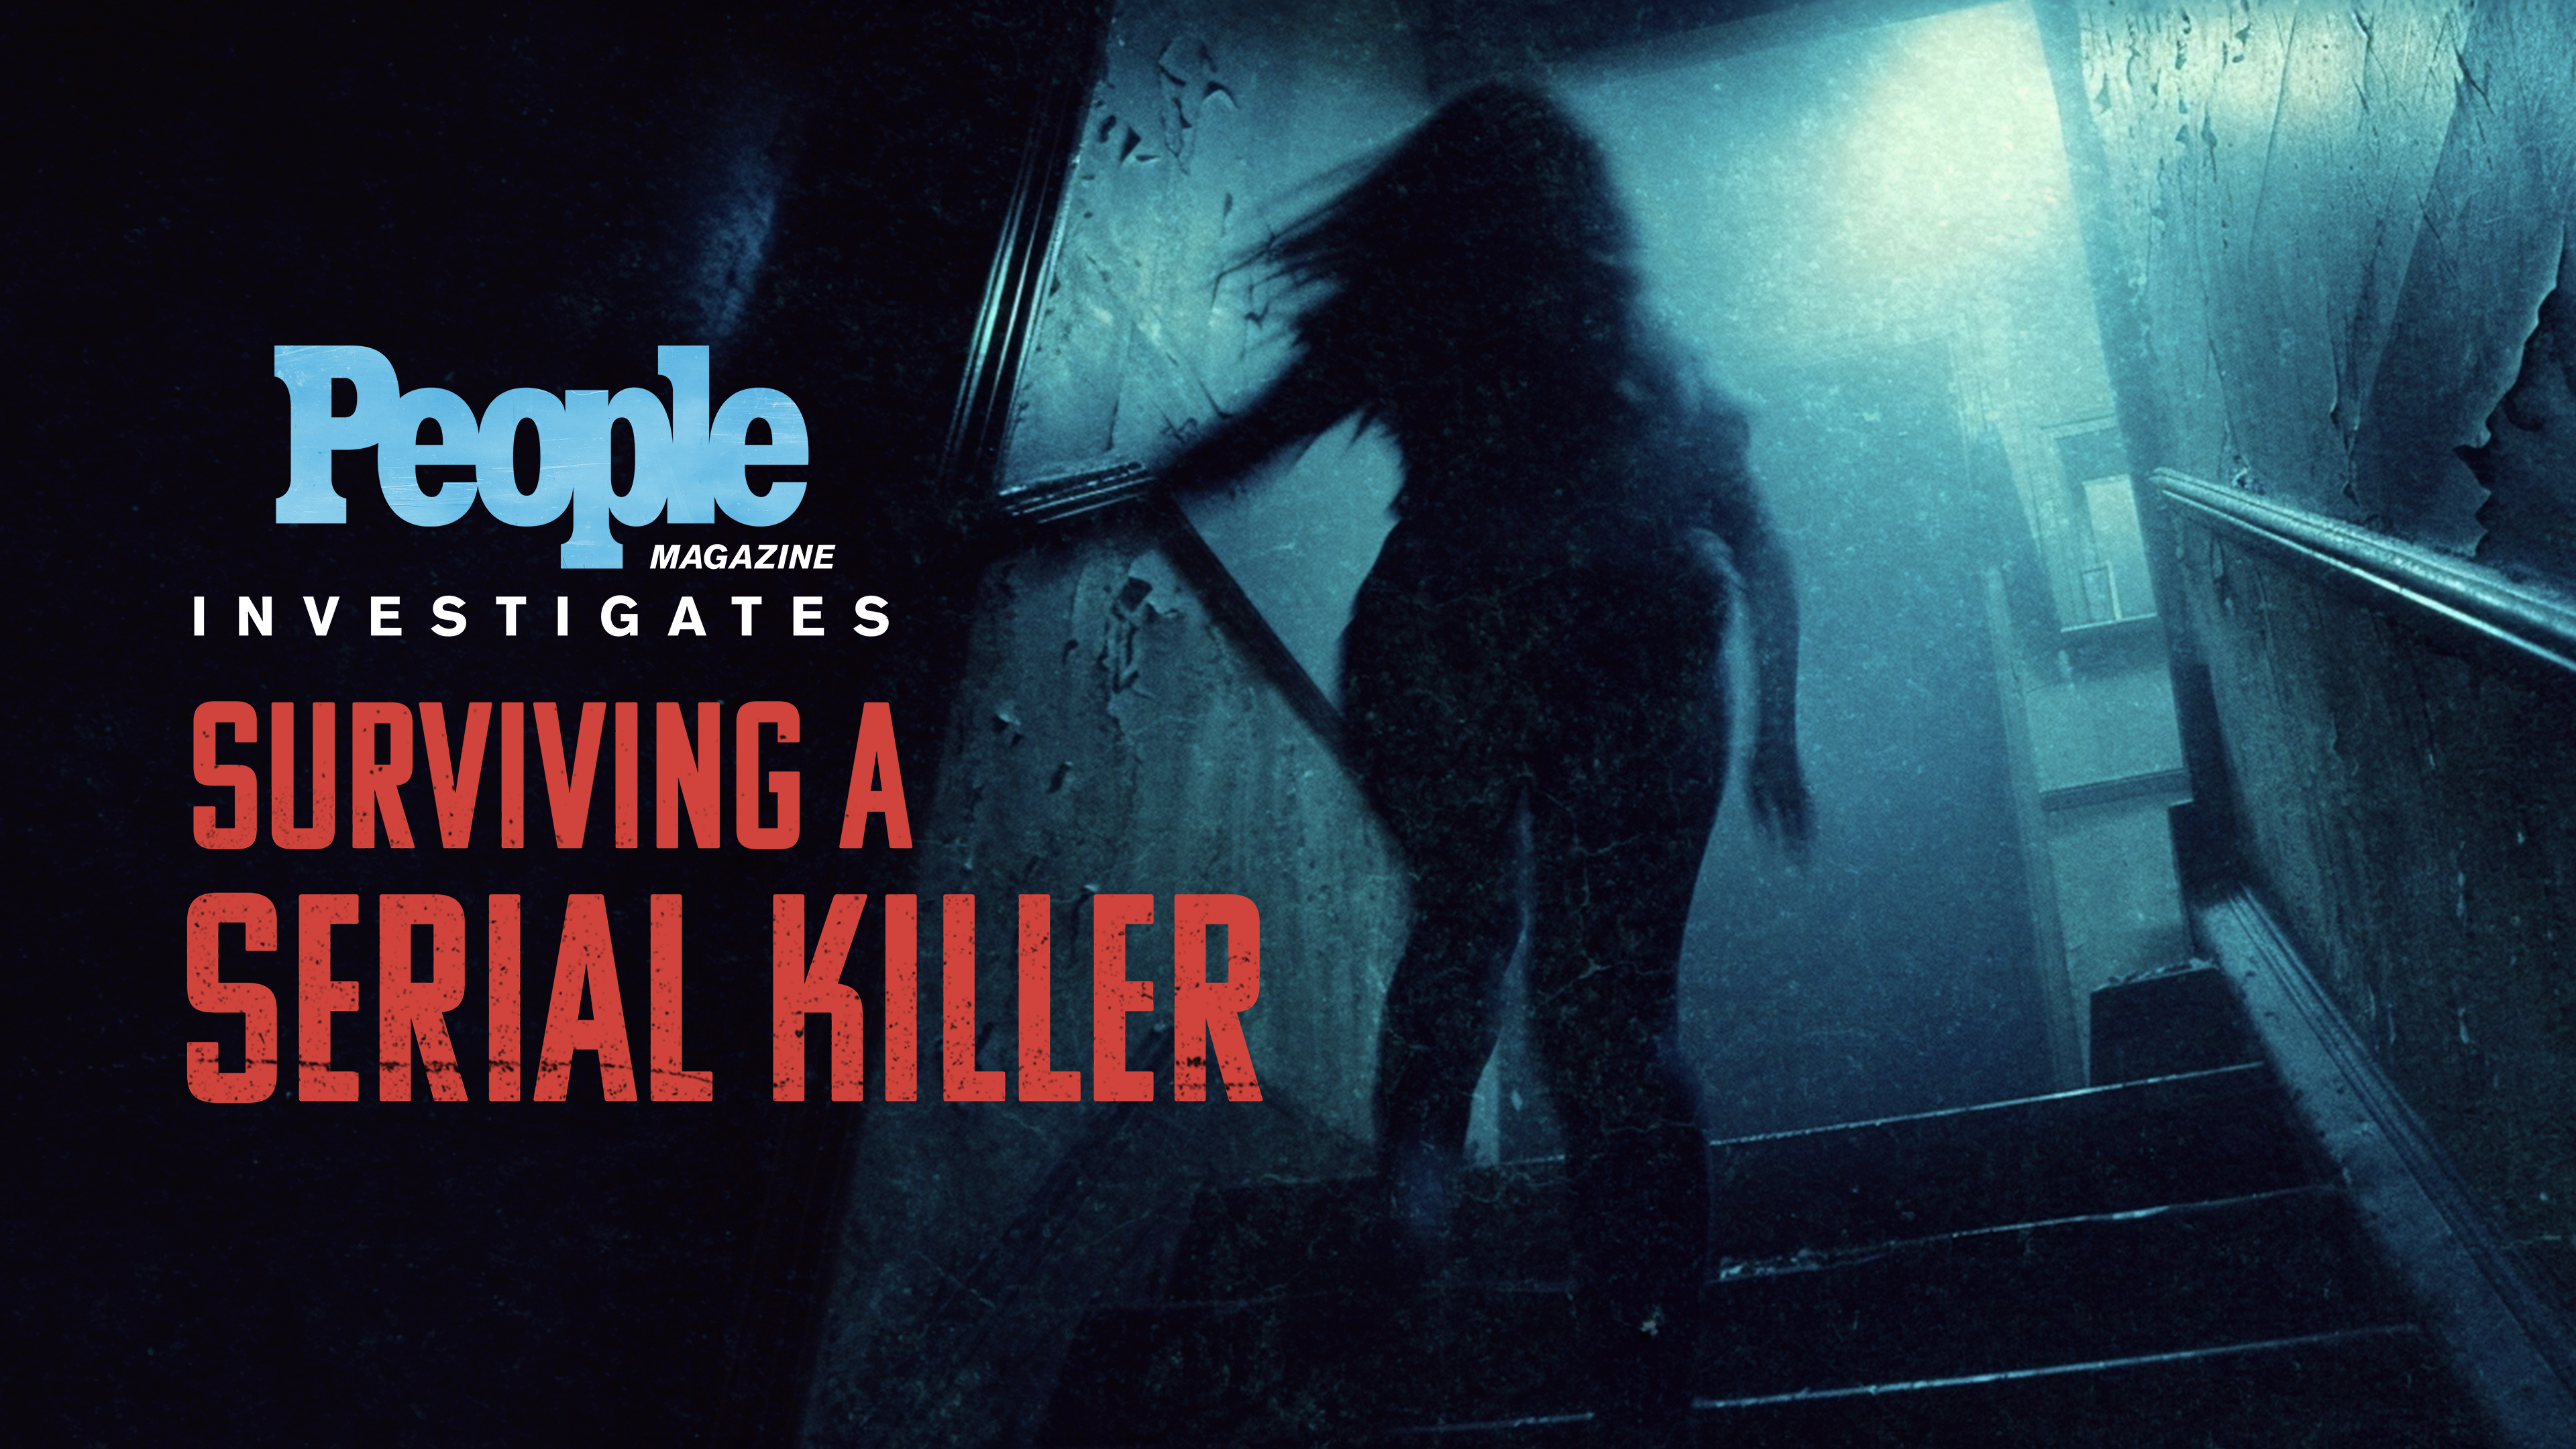 Prepare for Chilling Truths: Season Premiere of People Magazine Investigates - 'Surviving A Serial Killer' Airs This Sunday, May 5th!